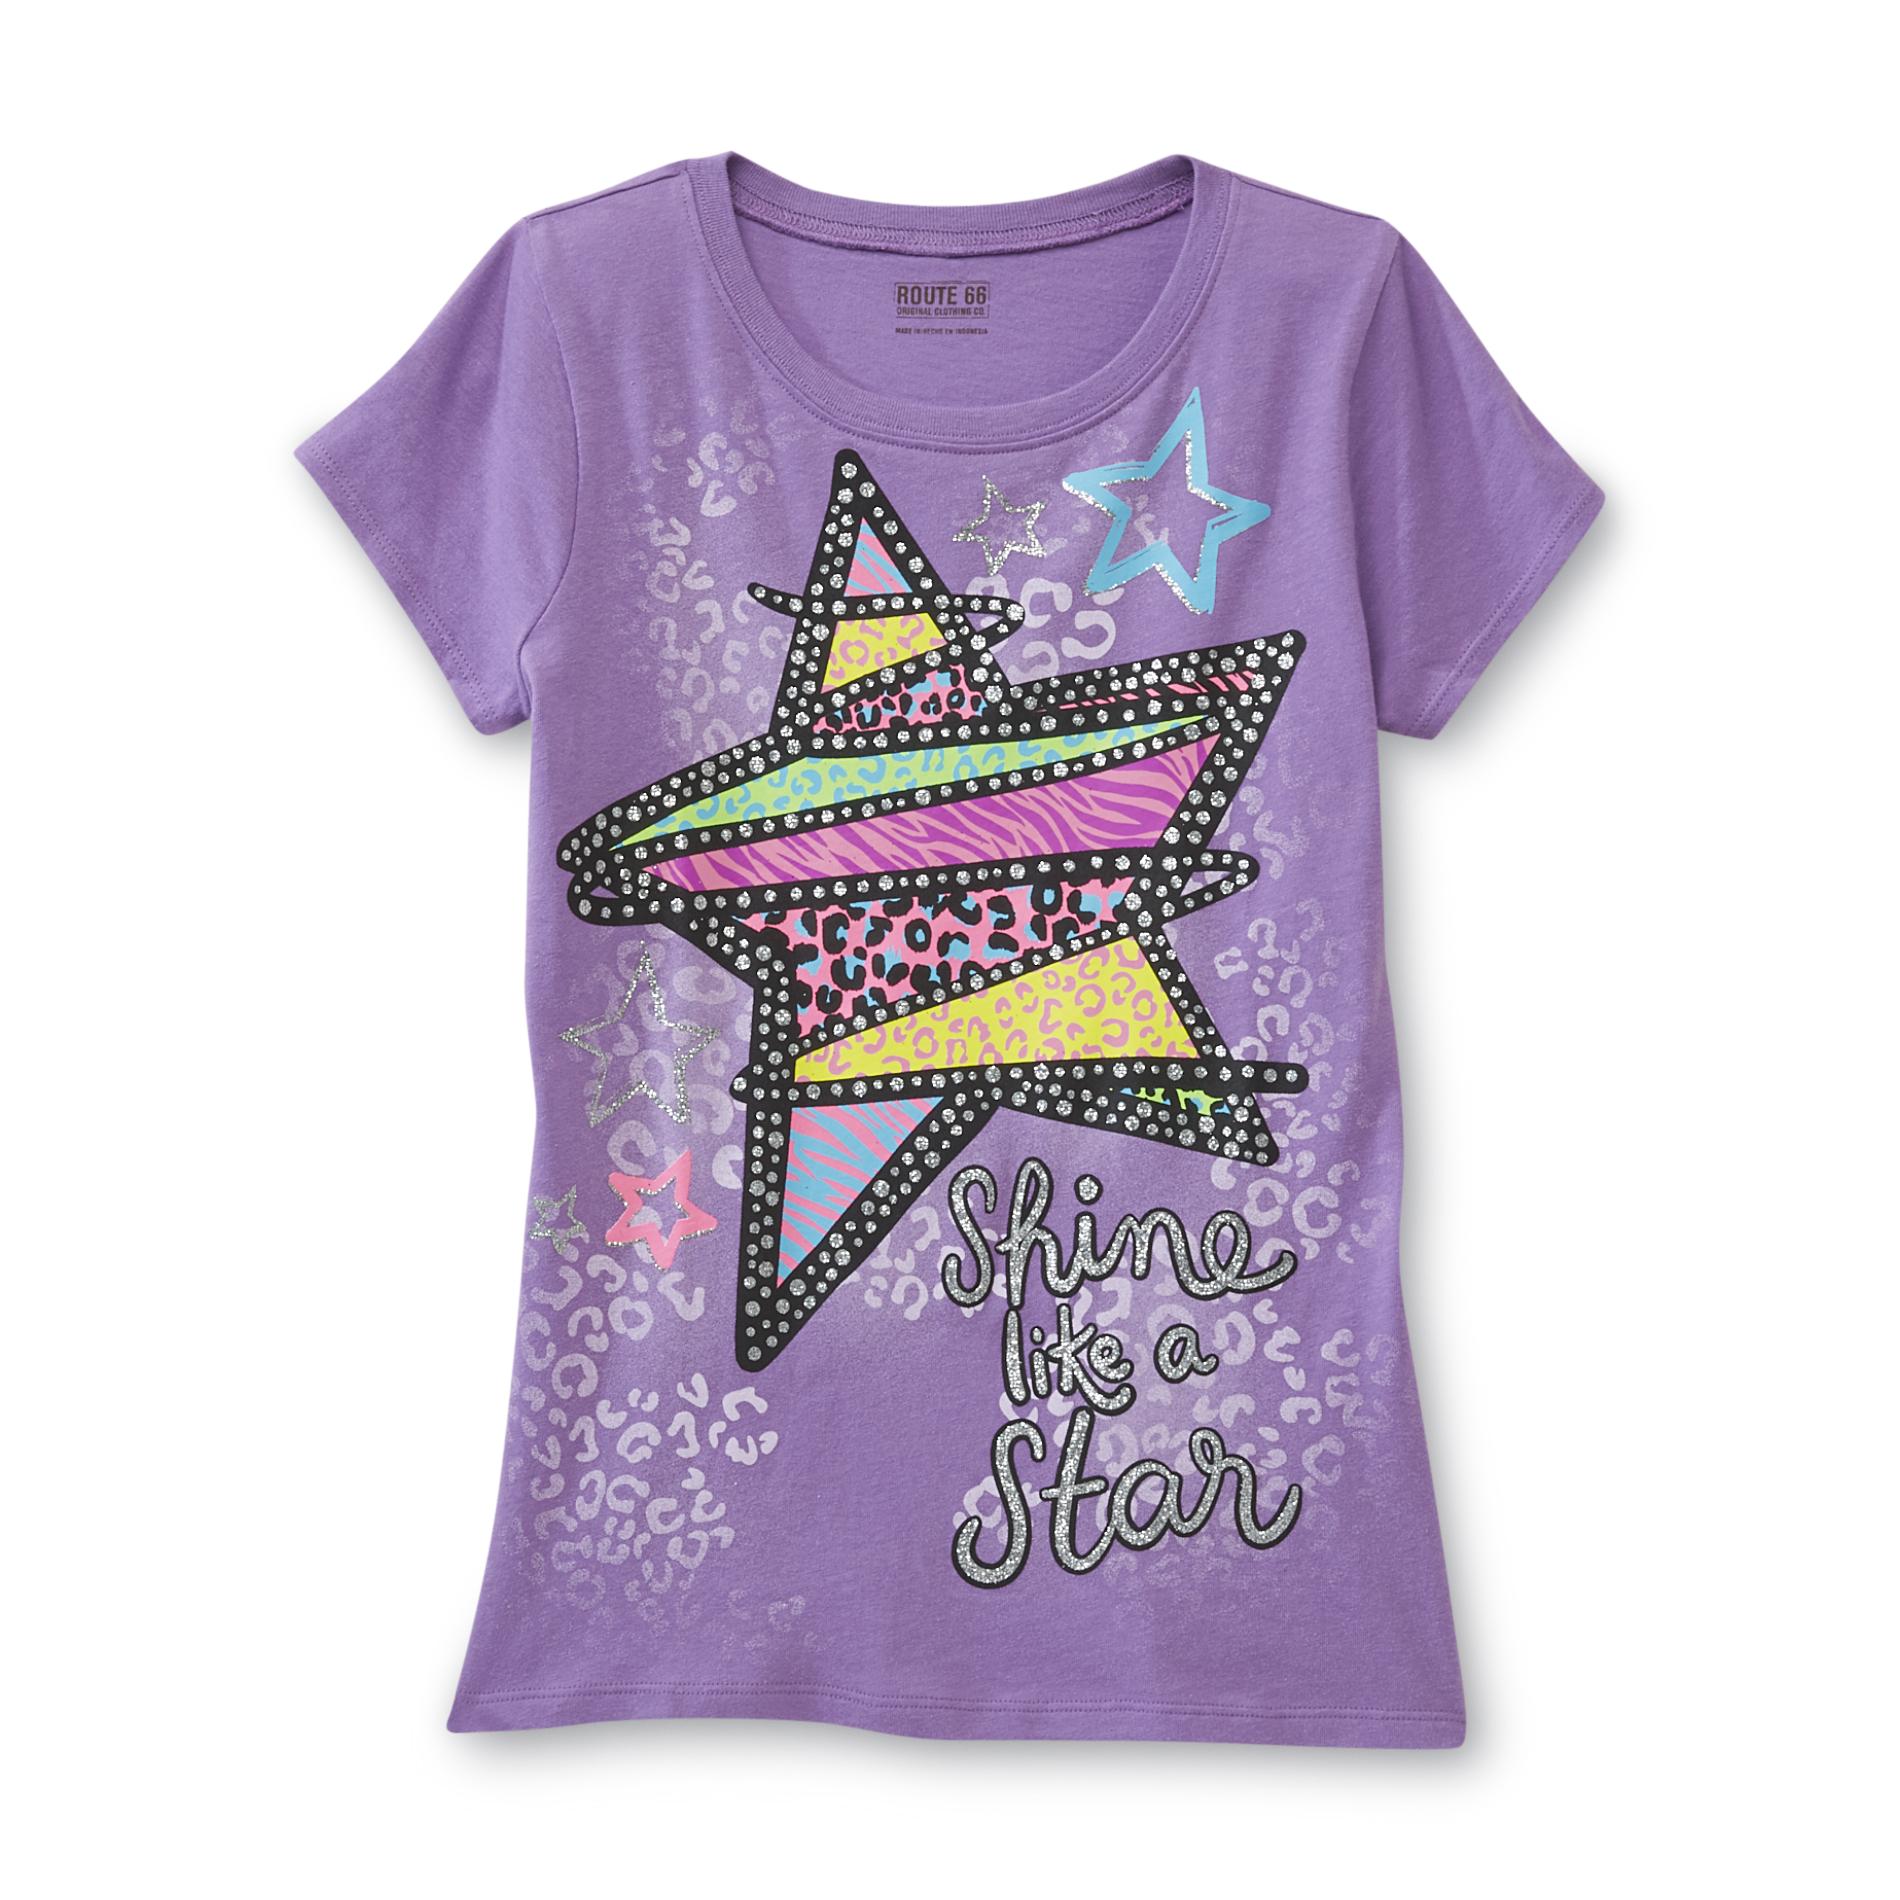 Route 66 Girl's Graphic T-Shirt - Star/Animal Print